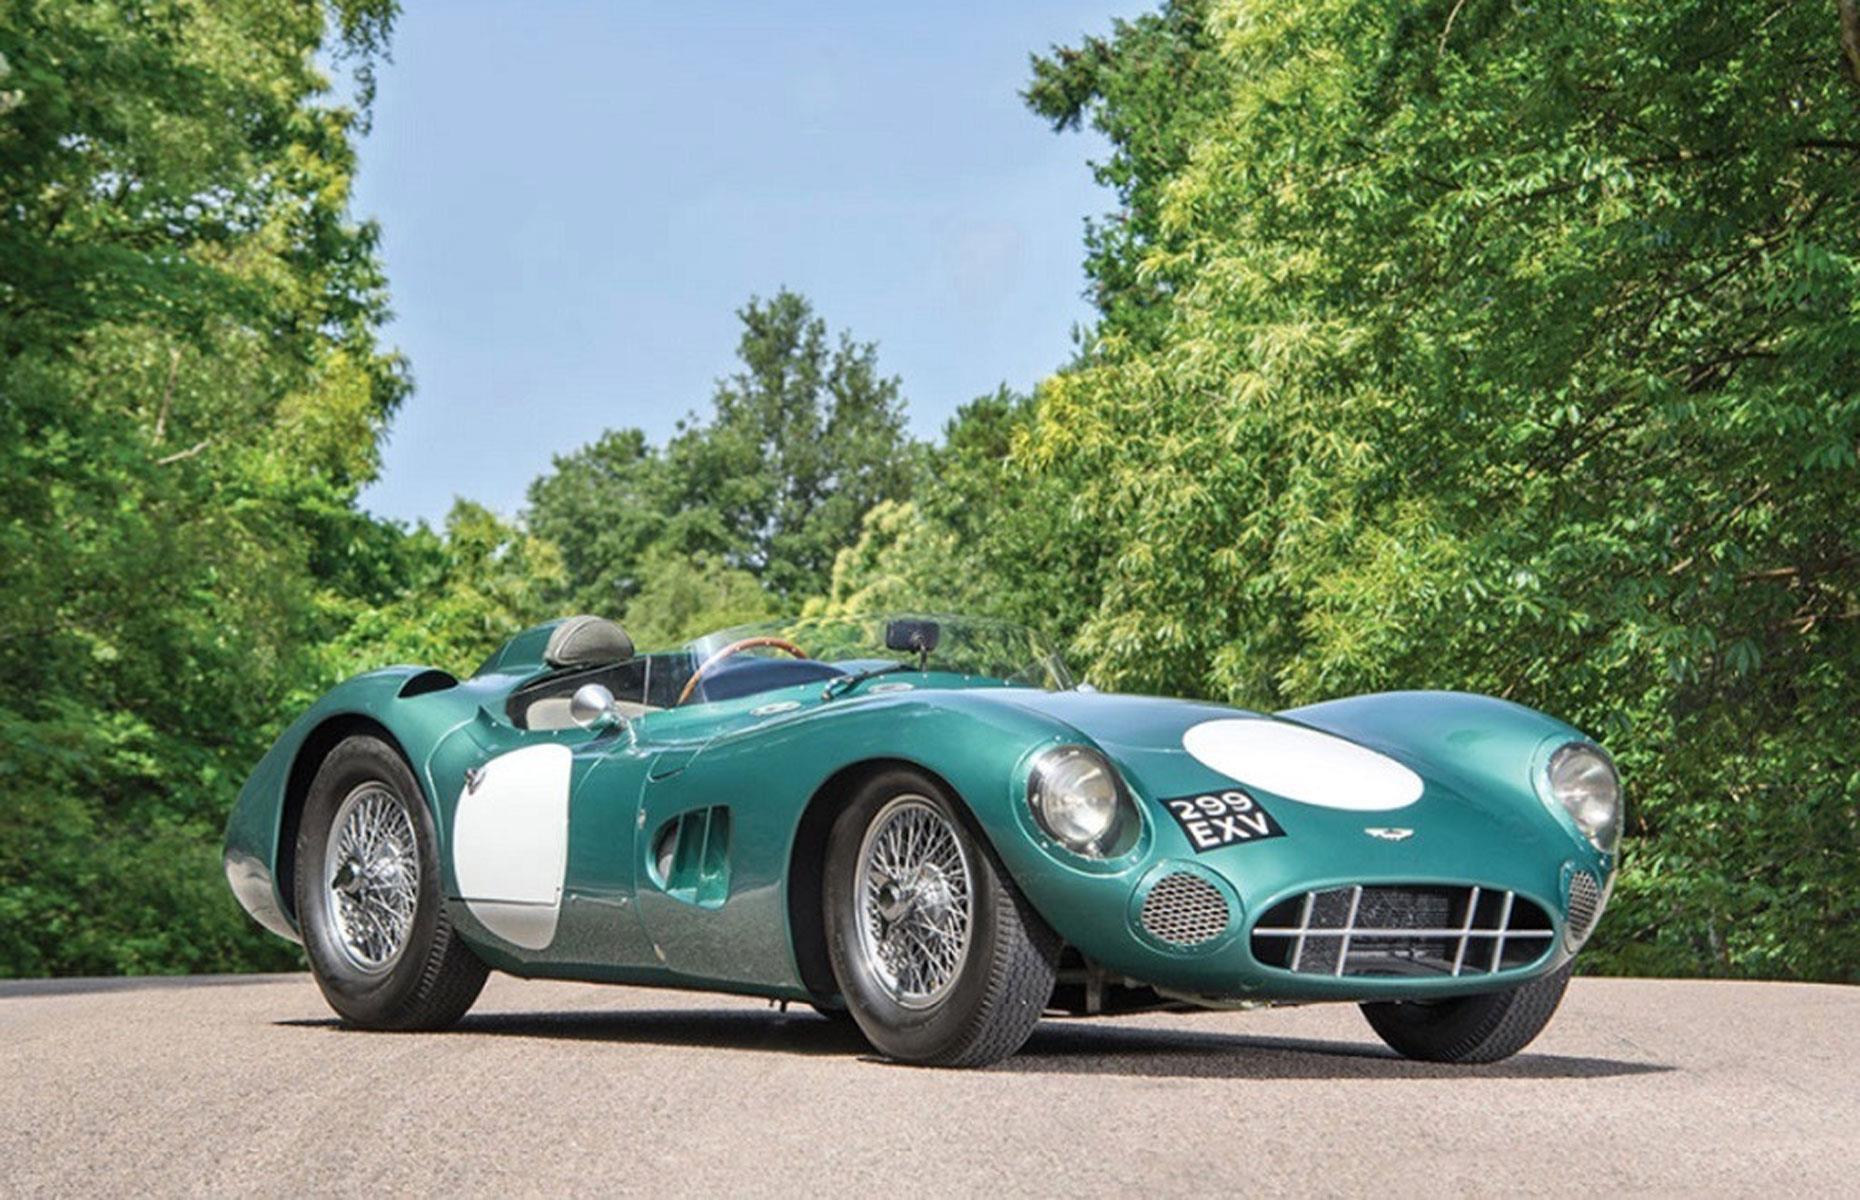 6th. Classic cars: standout sales